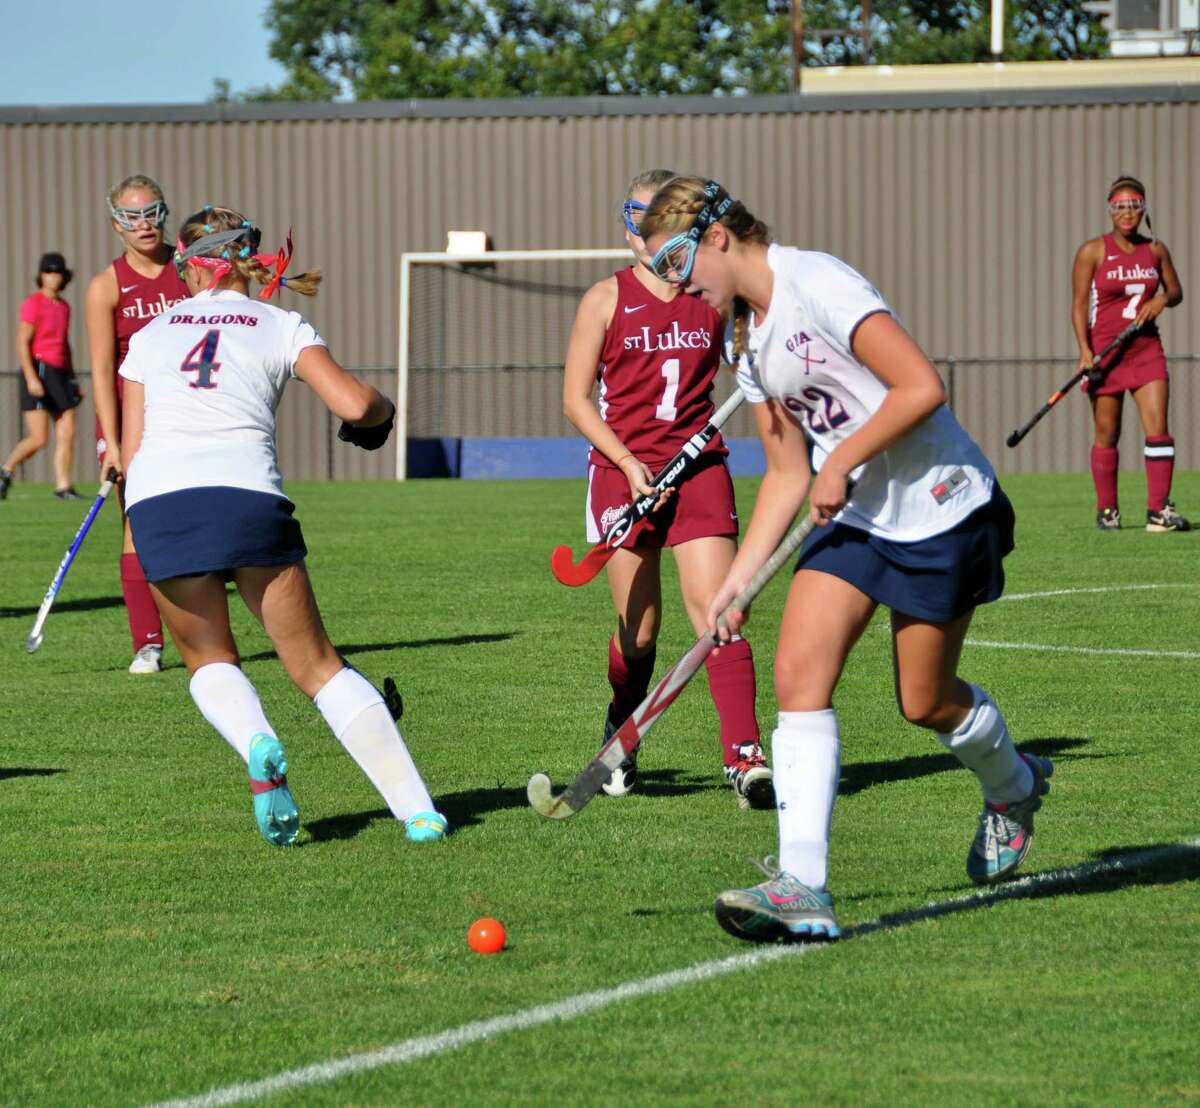 Junior Maggie Sherin, of Weston, controls the ball in the Greens Farms Academy's 3-1 win over St. Luke's on Sept. 11.